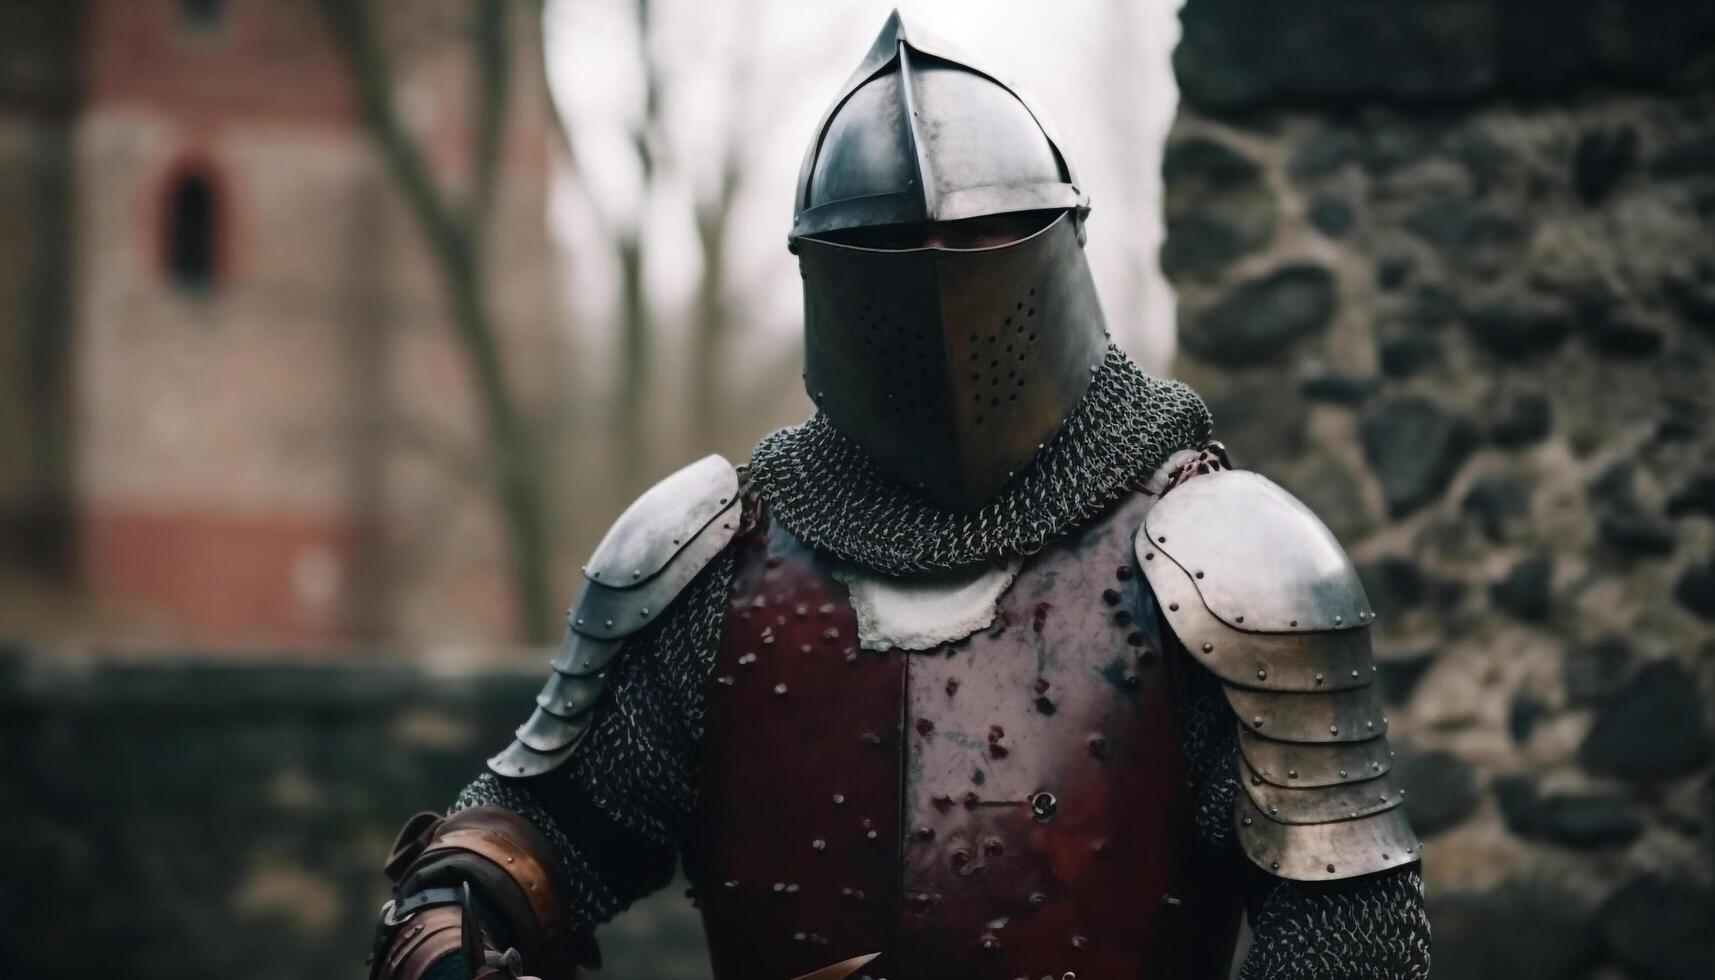 Knight in armor wields sword for battle generated by AI photo